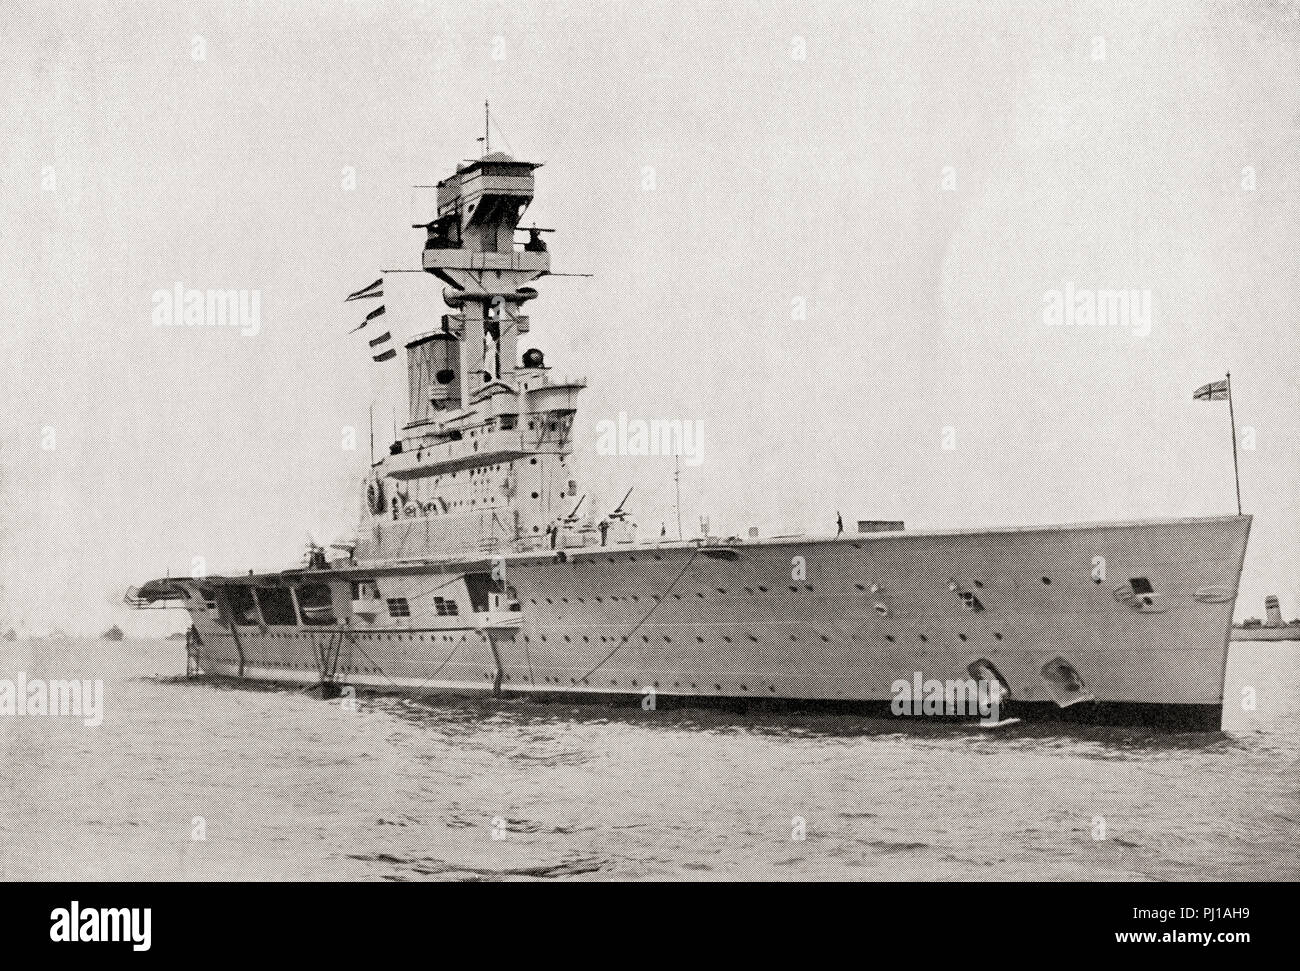 HMS Hermes, a British aircraft carrier built for the Royal Navy, the world's first ship to be designed as an aircraft carrier, she was sunk by Japanese aircraft, 9 April 1942.  From The Book of Ships, published c.1920. Stock Photo